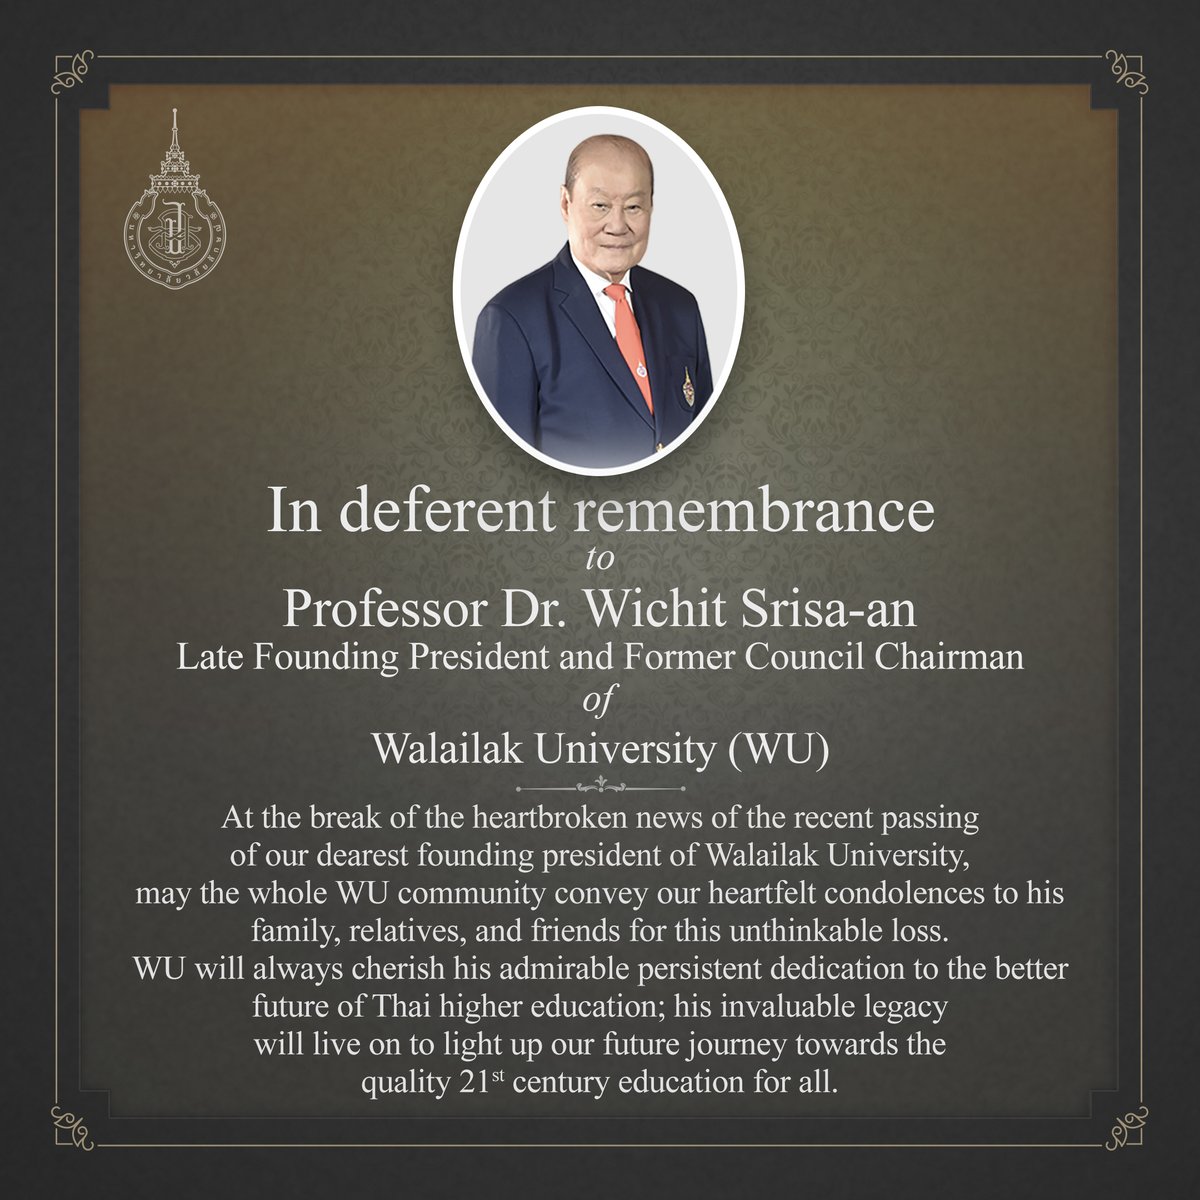 In deferent remembrance to Professor Dr. Wichit Srisa-an, Late Founding President and Former Council Chairman of Walailak University.